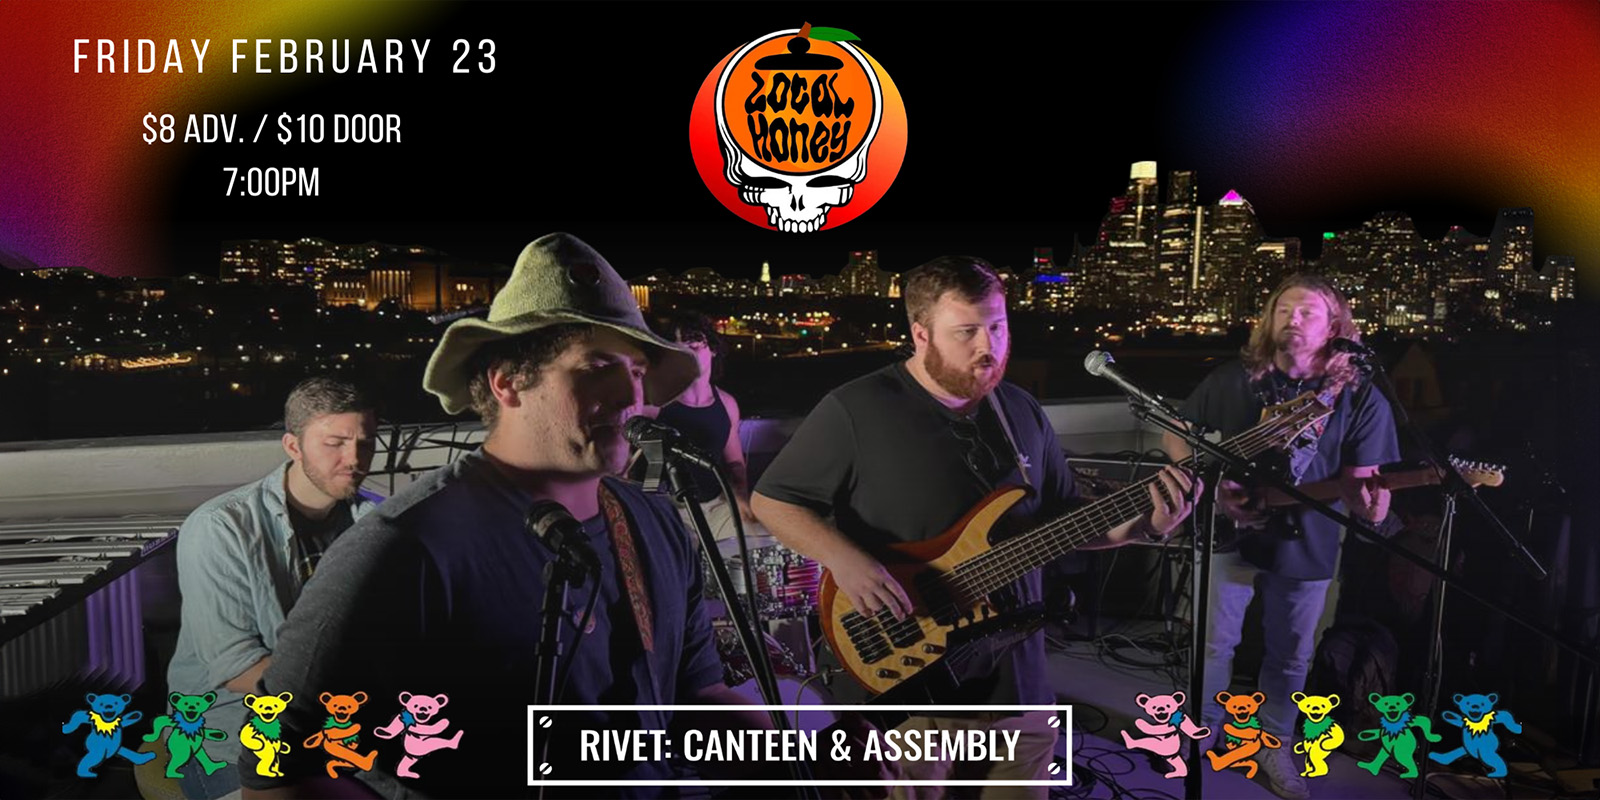 Join us at Rivet for Local Honey's live jam rock concert, featuring original tunes and classic hits from Grateful Dead, Pink Floyd & more! Friday, February 23rd. Doors at 7:00PM. All ages are welcome!